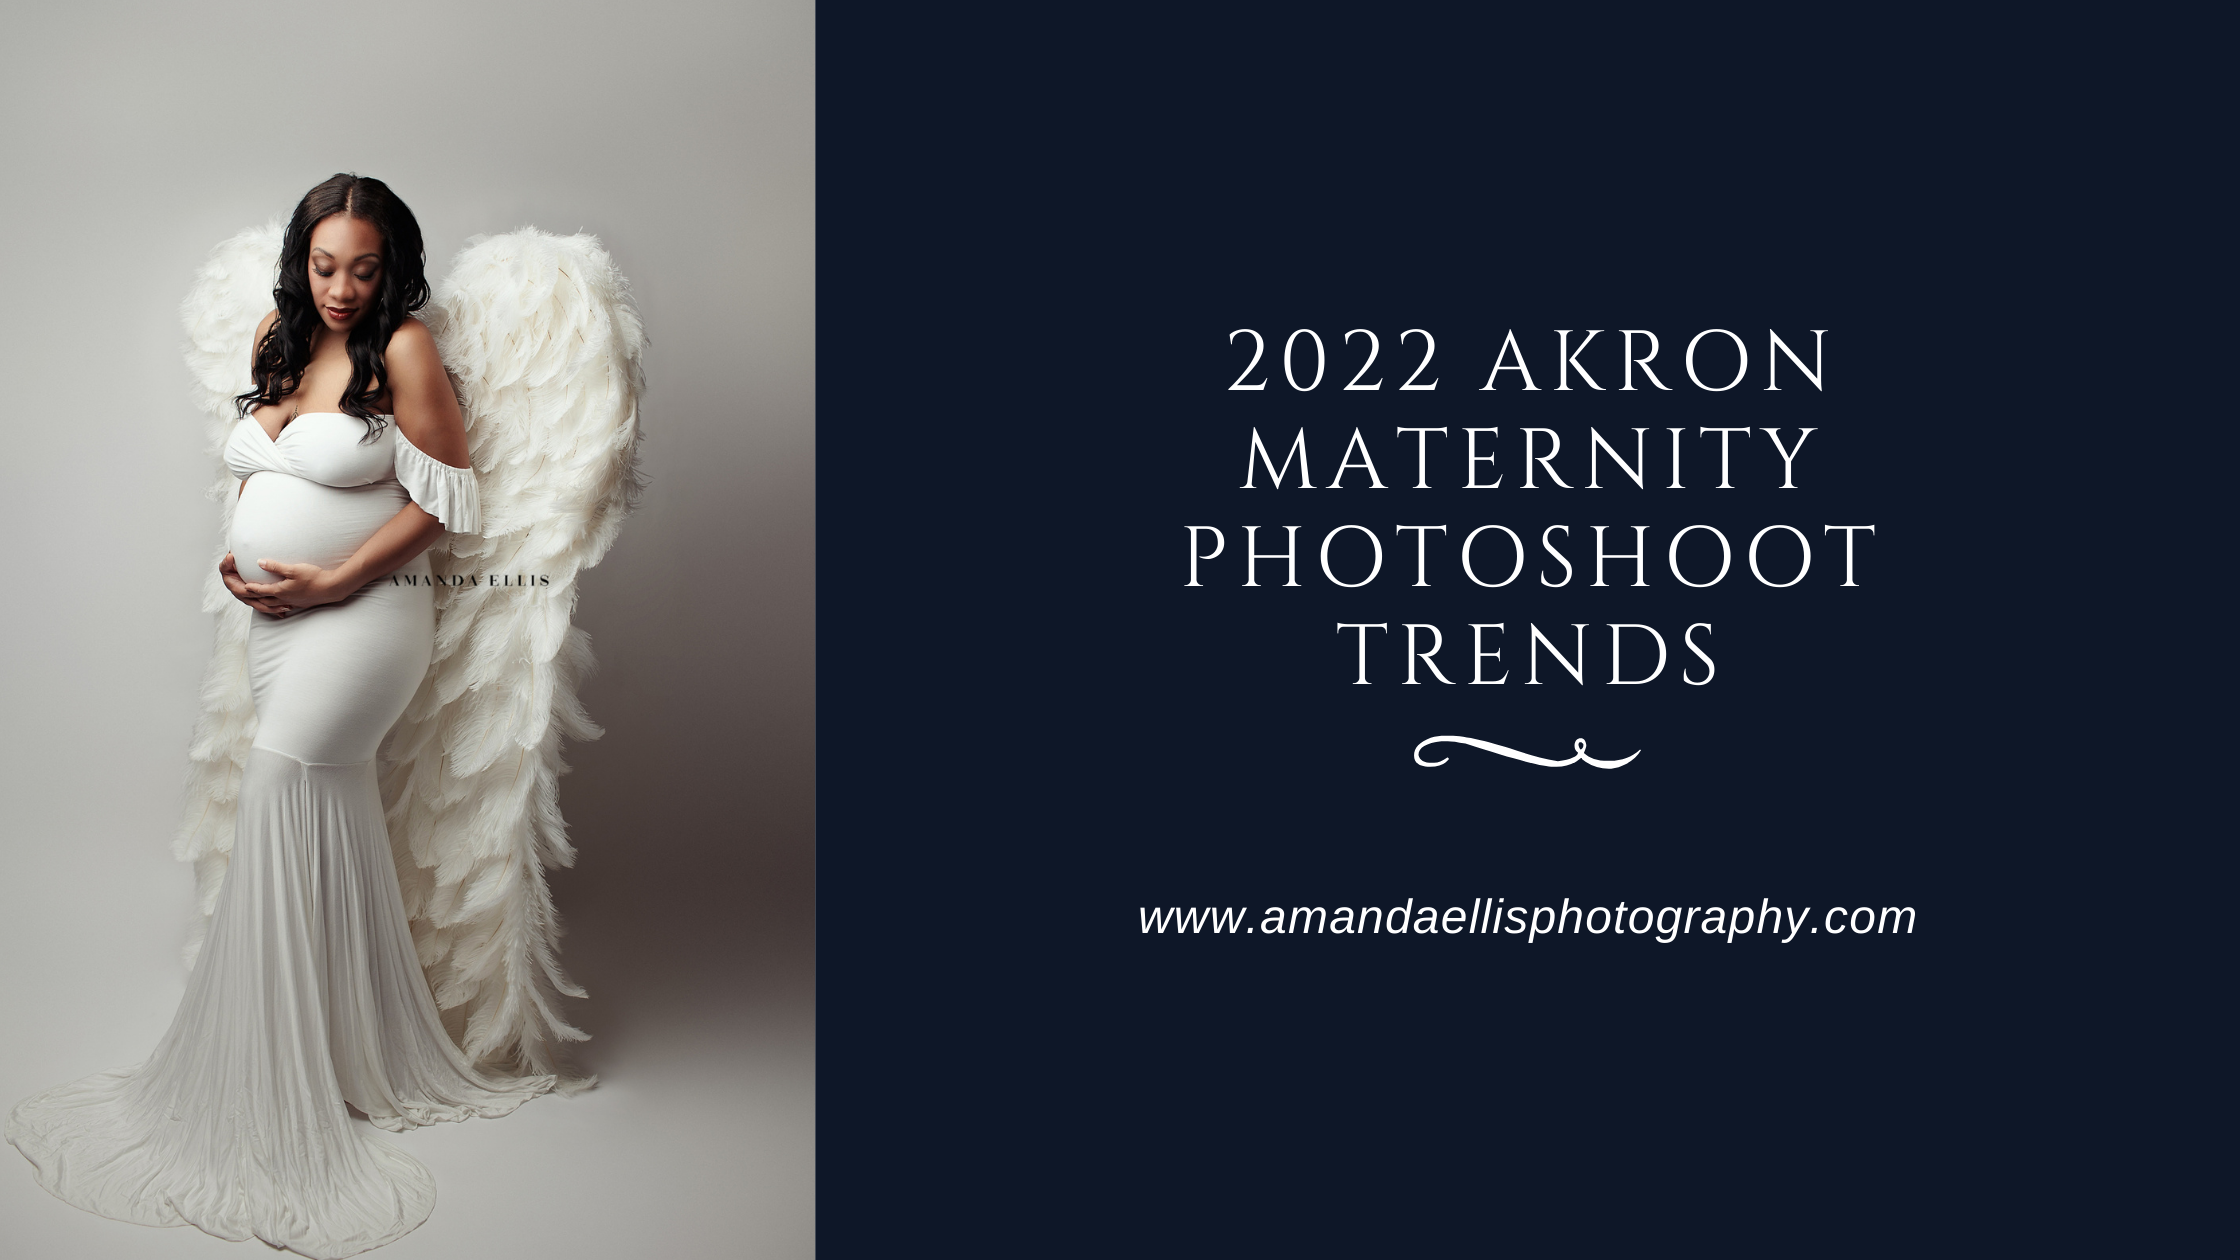 The top trends in maternity photography